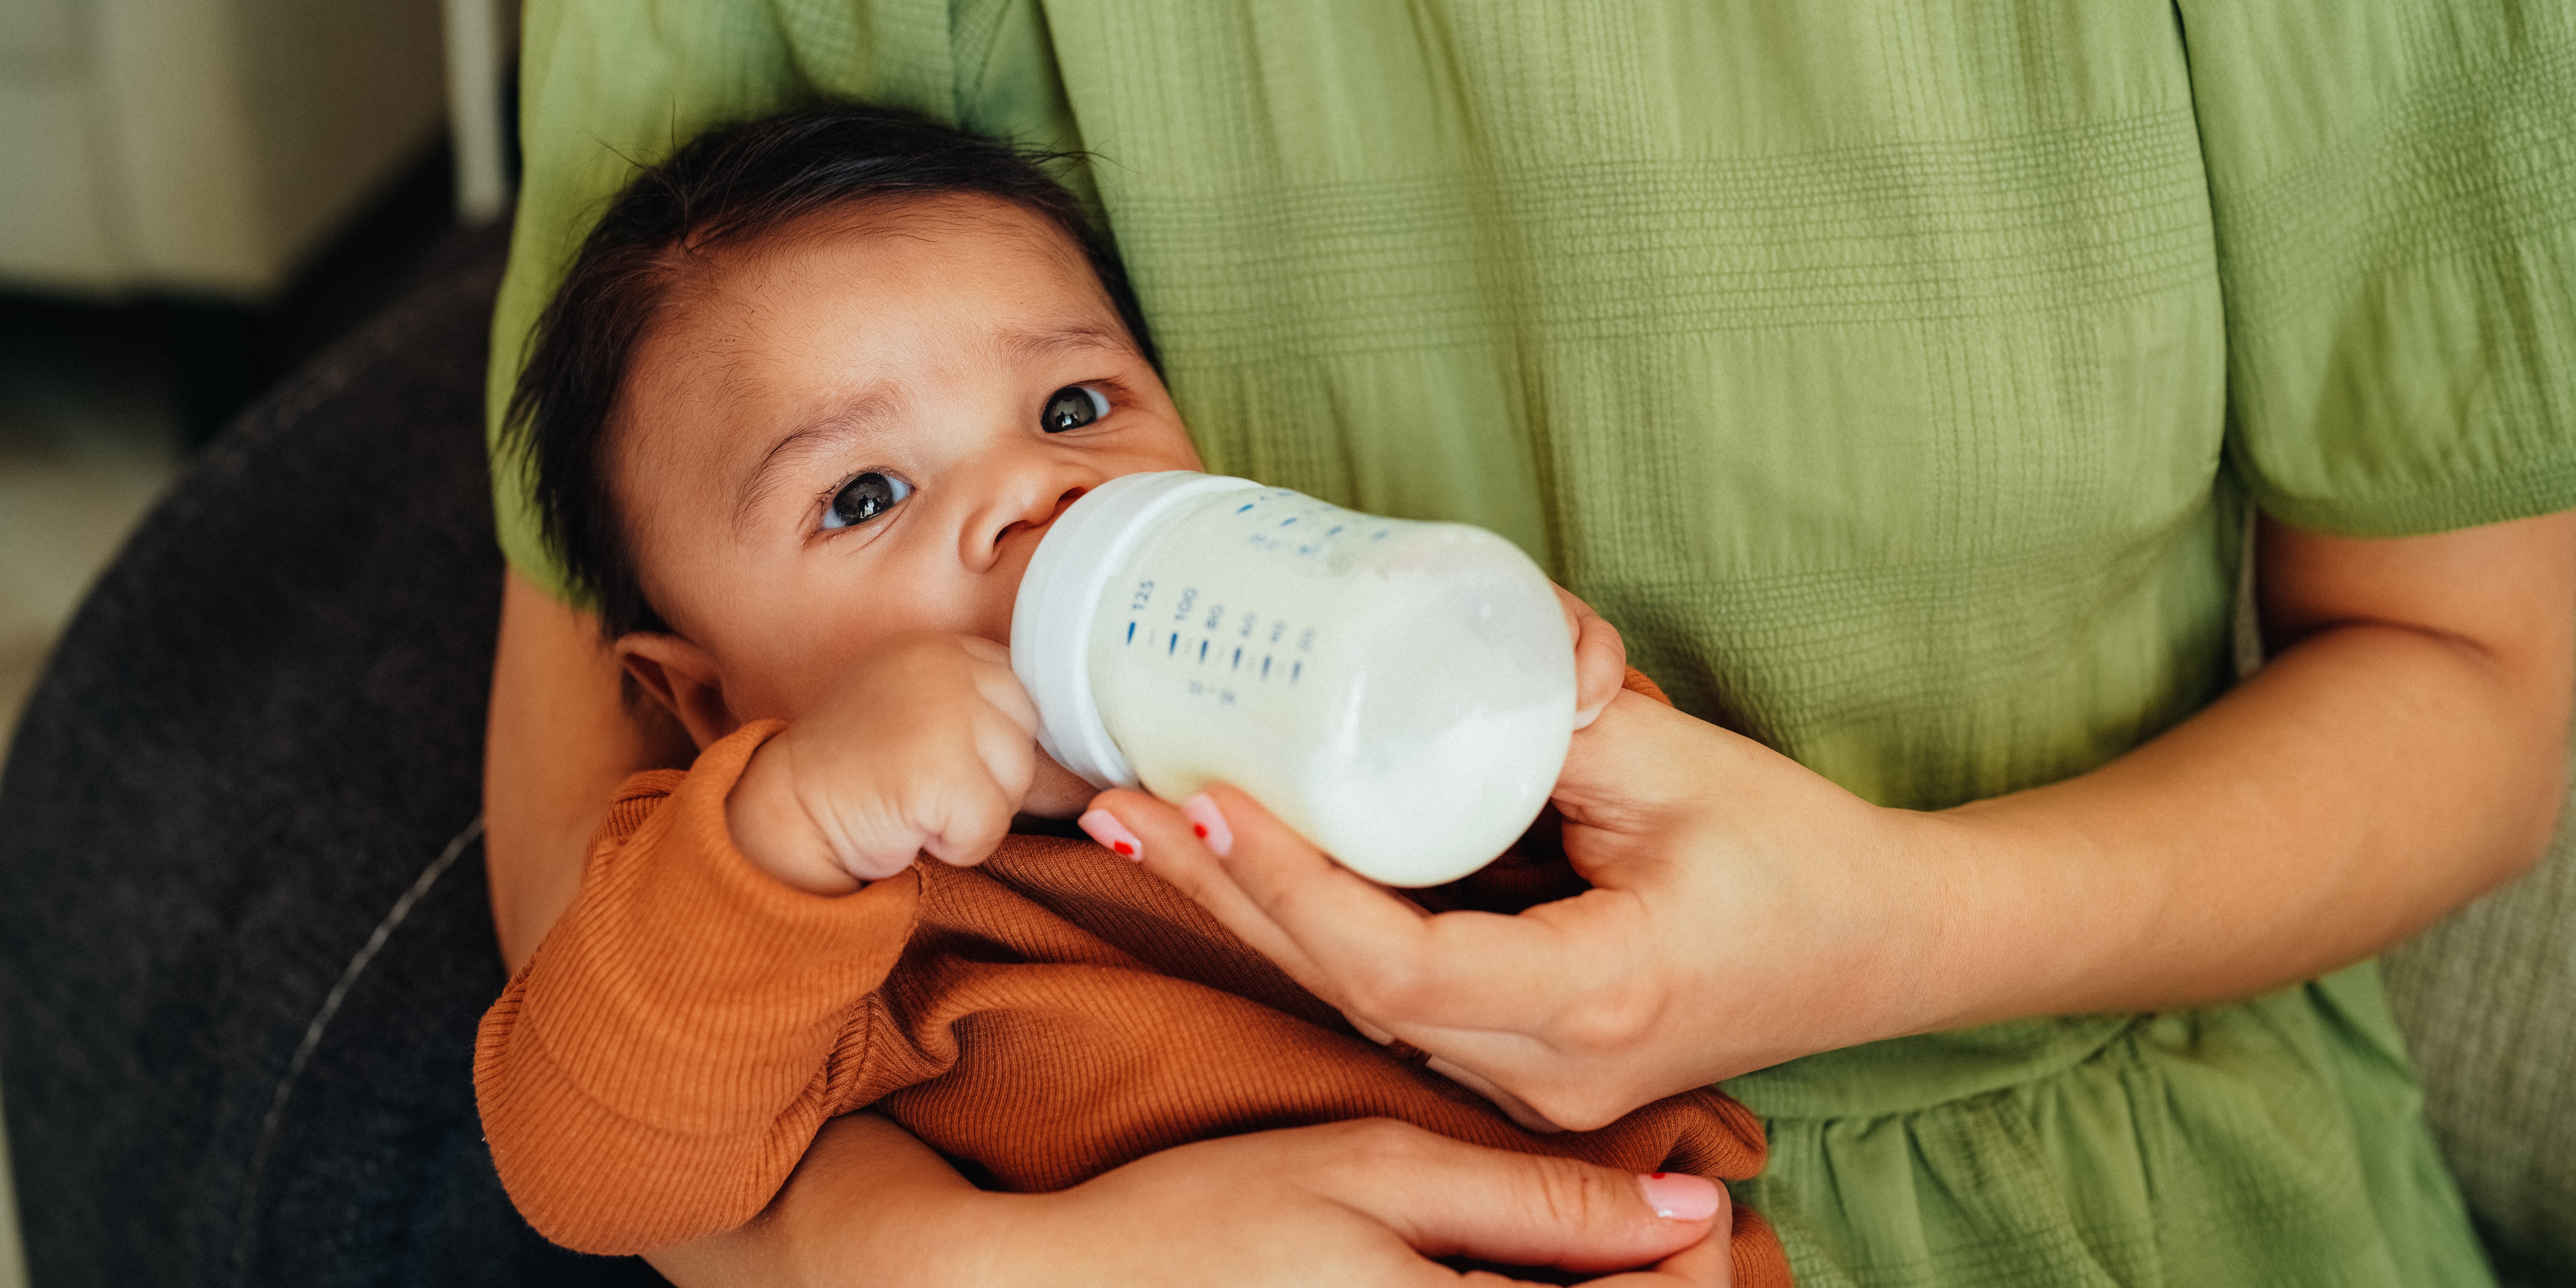 Paced bottle feeding: How you feed matters more than what's in the